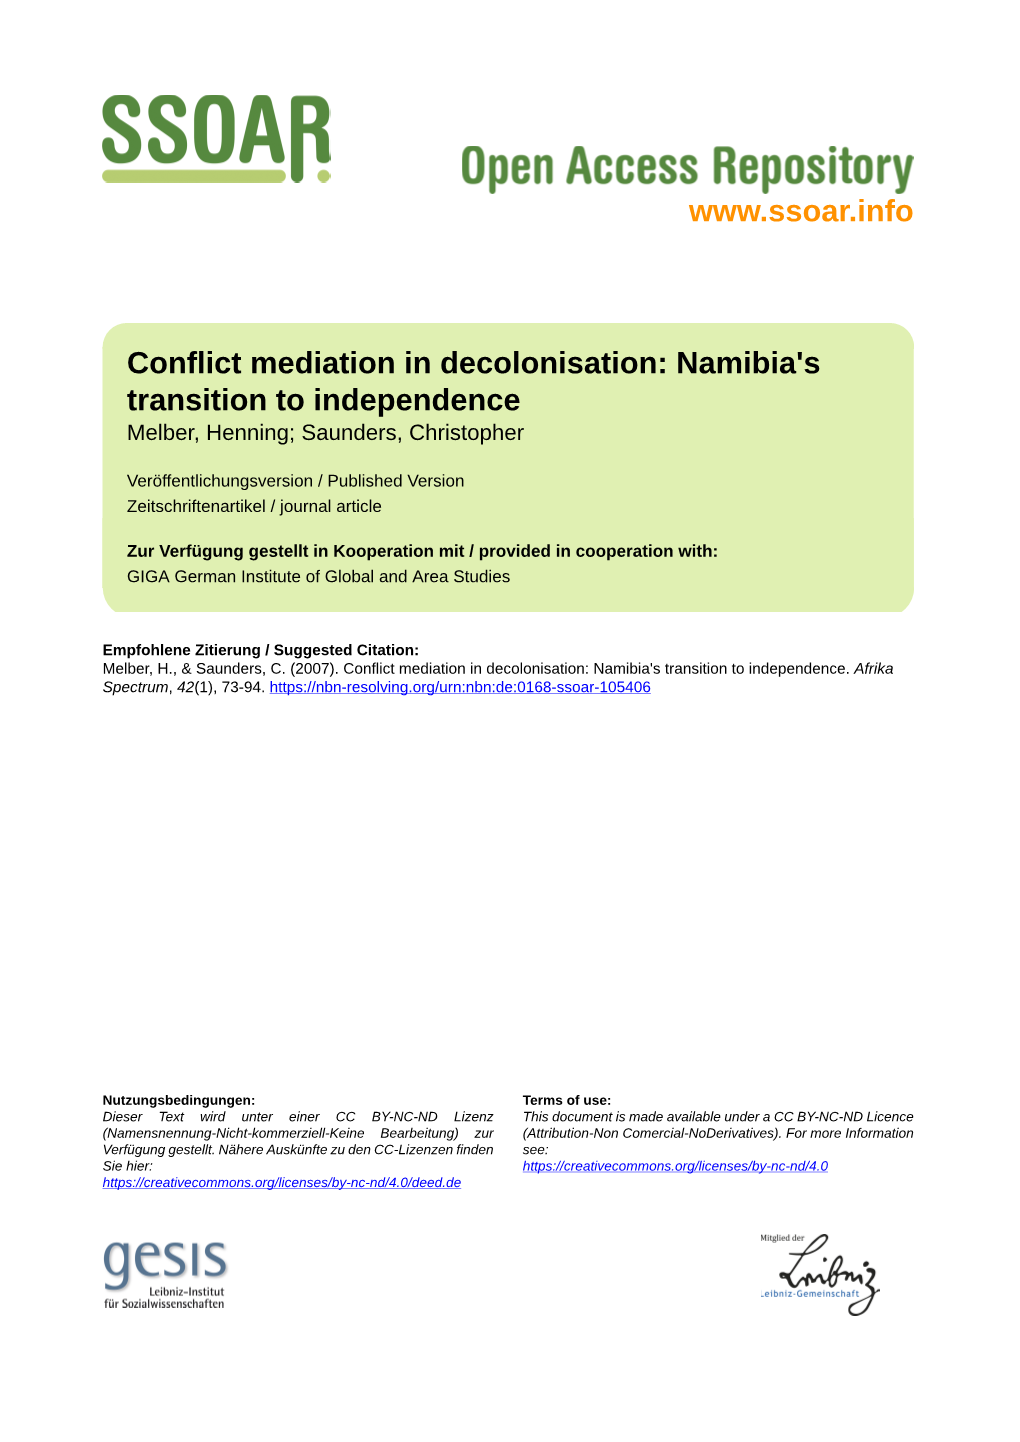 Conflict Mediation in Decolonisation: Namibia's Transition